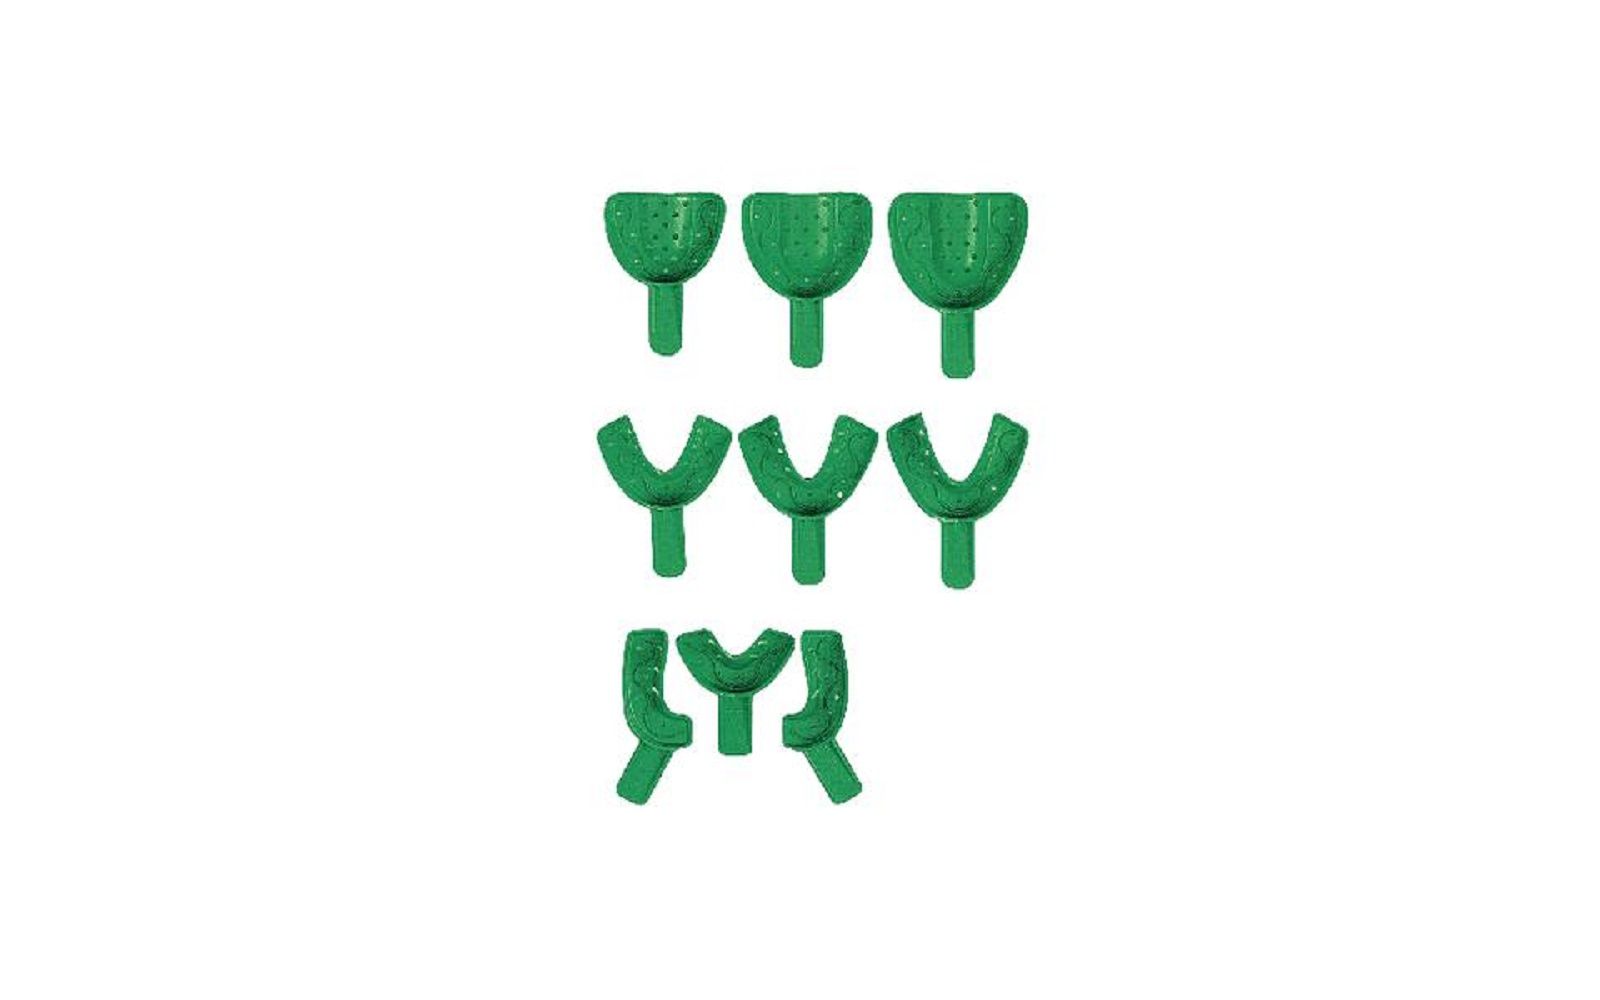 Coe® disposable spacer impression trays – perforated, green color, 12/bag - gc america inc